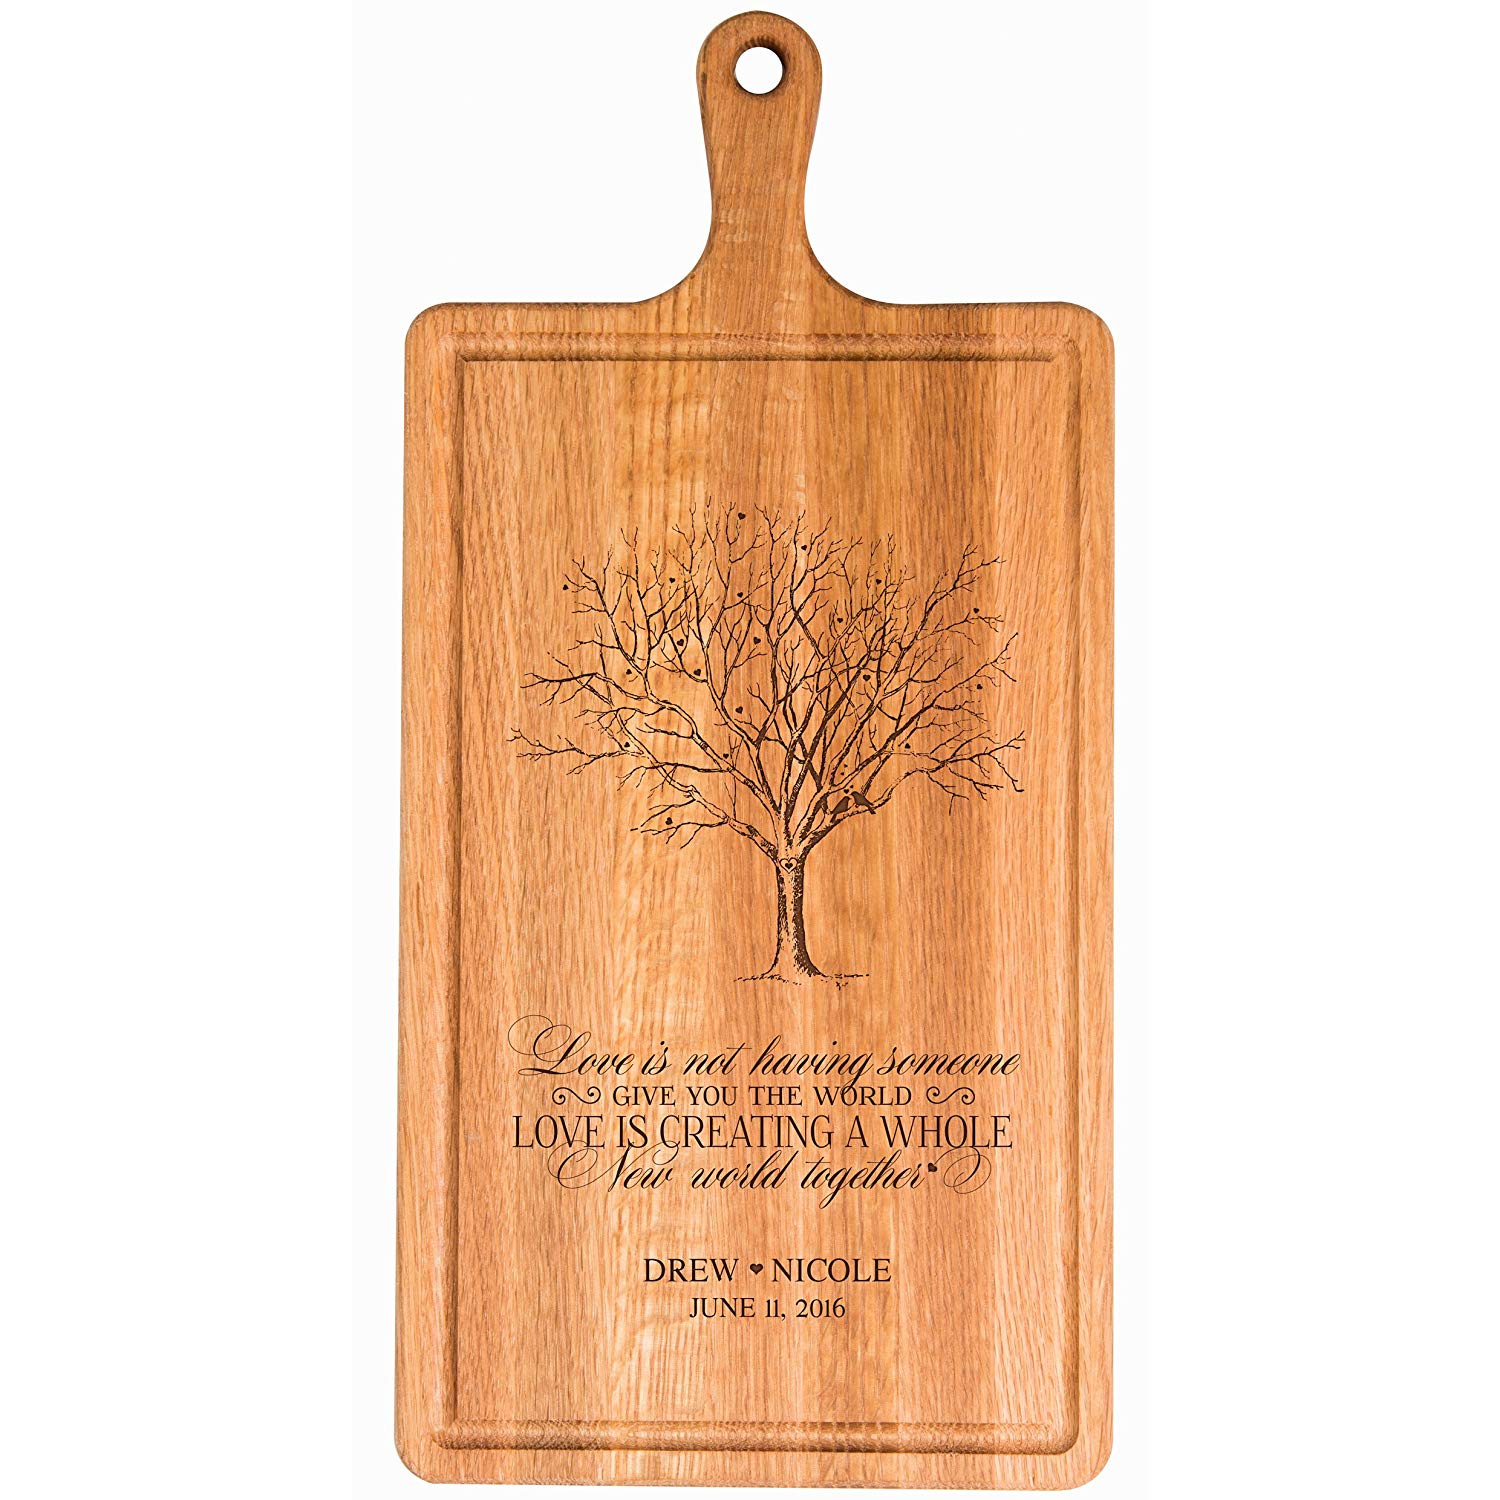 Personalized Family Wedding Cutting Board Gift - Give You the World - LifeSong Milestones